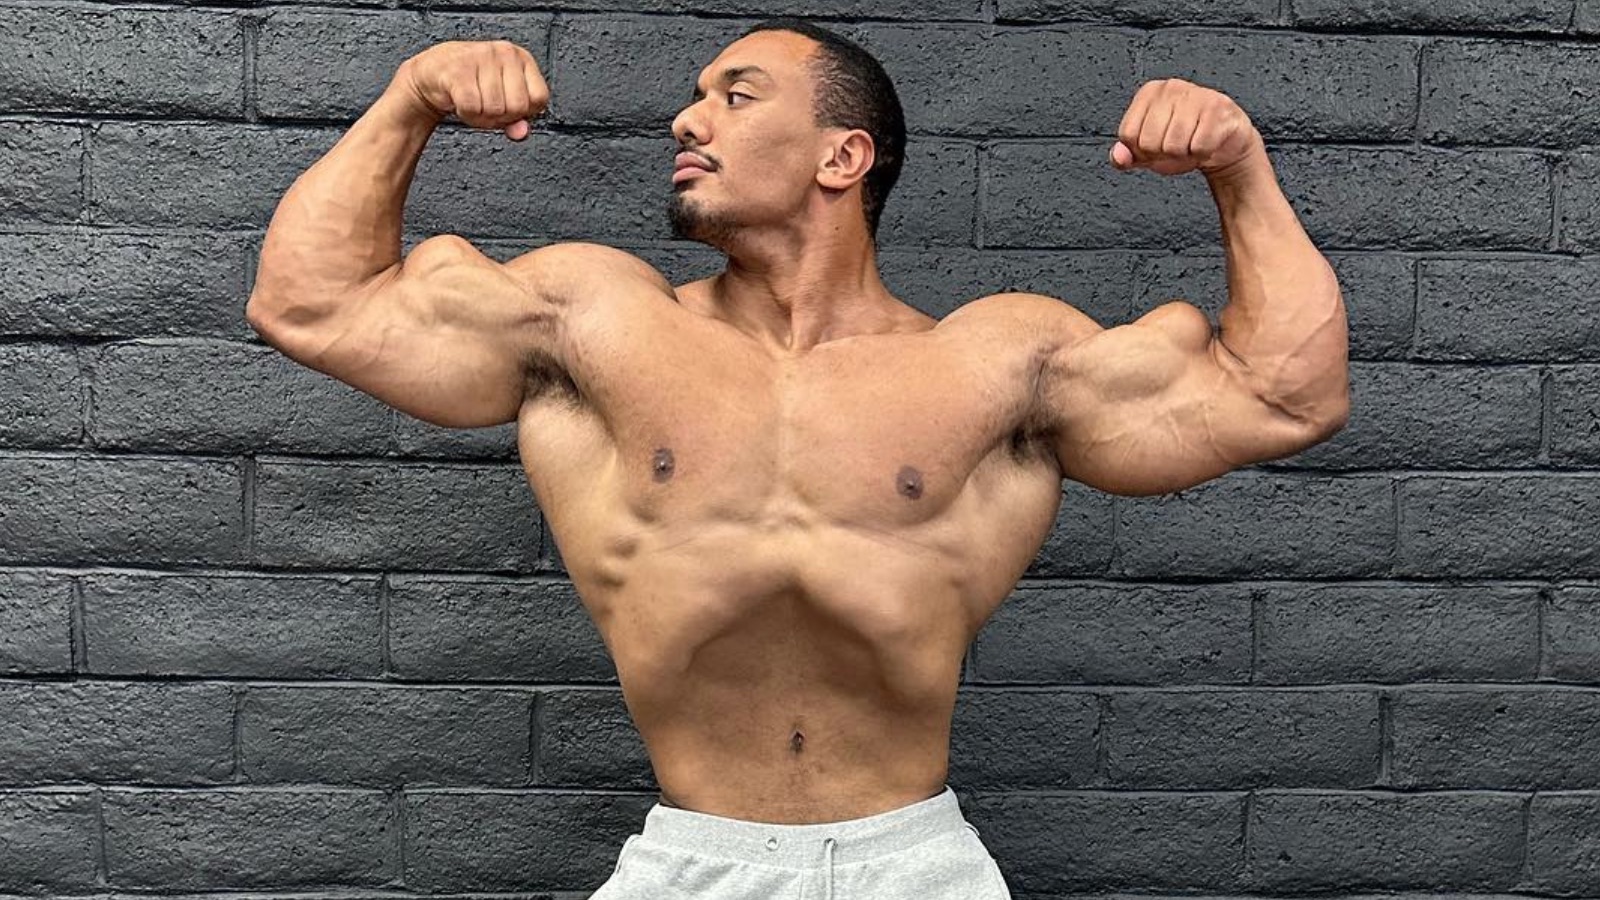 Larry Wheels Teases Ripped Transformation for Classic Physique